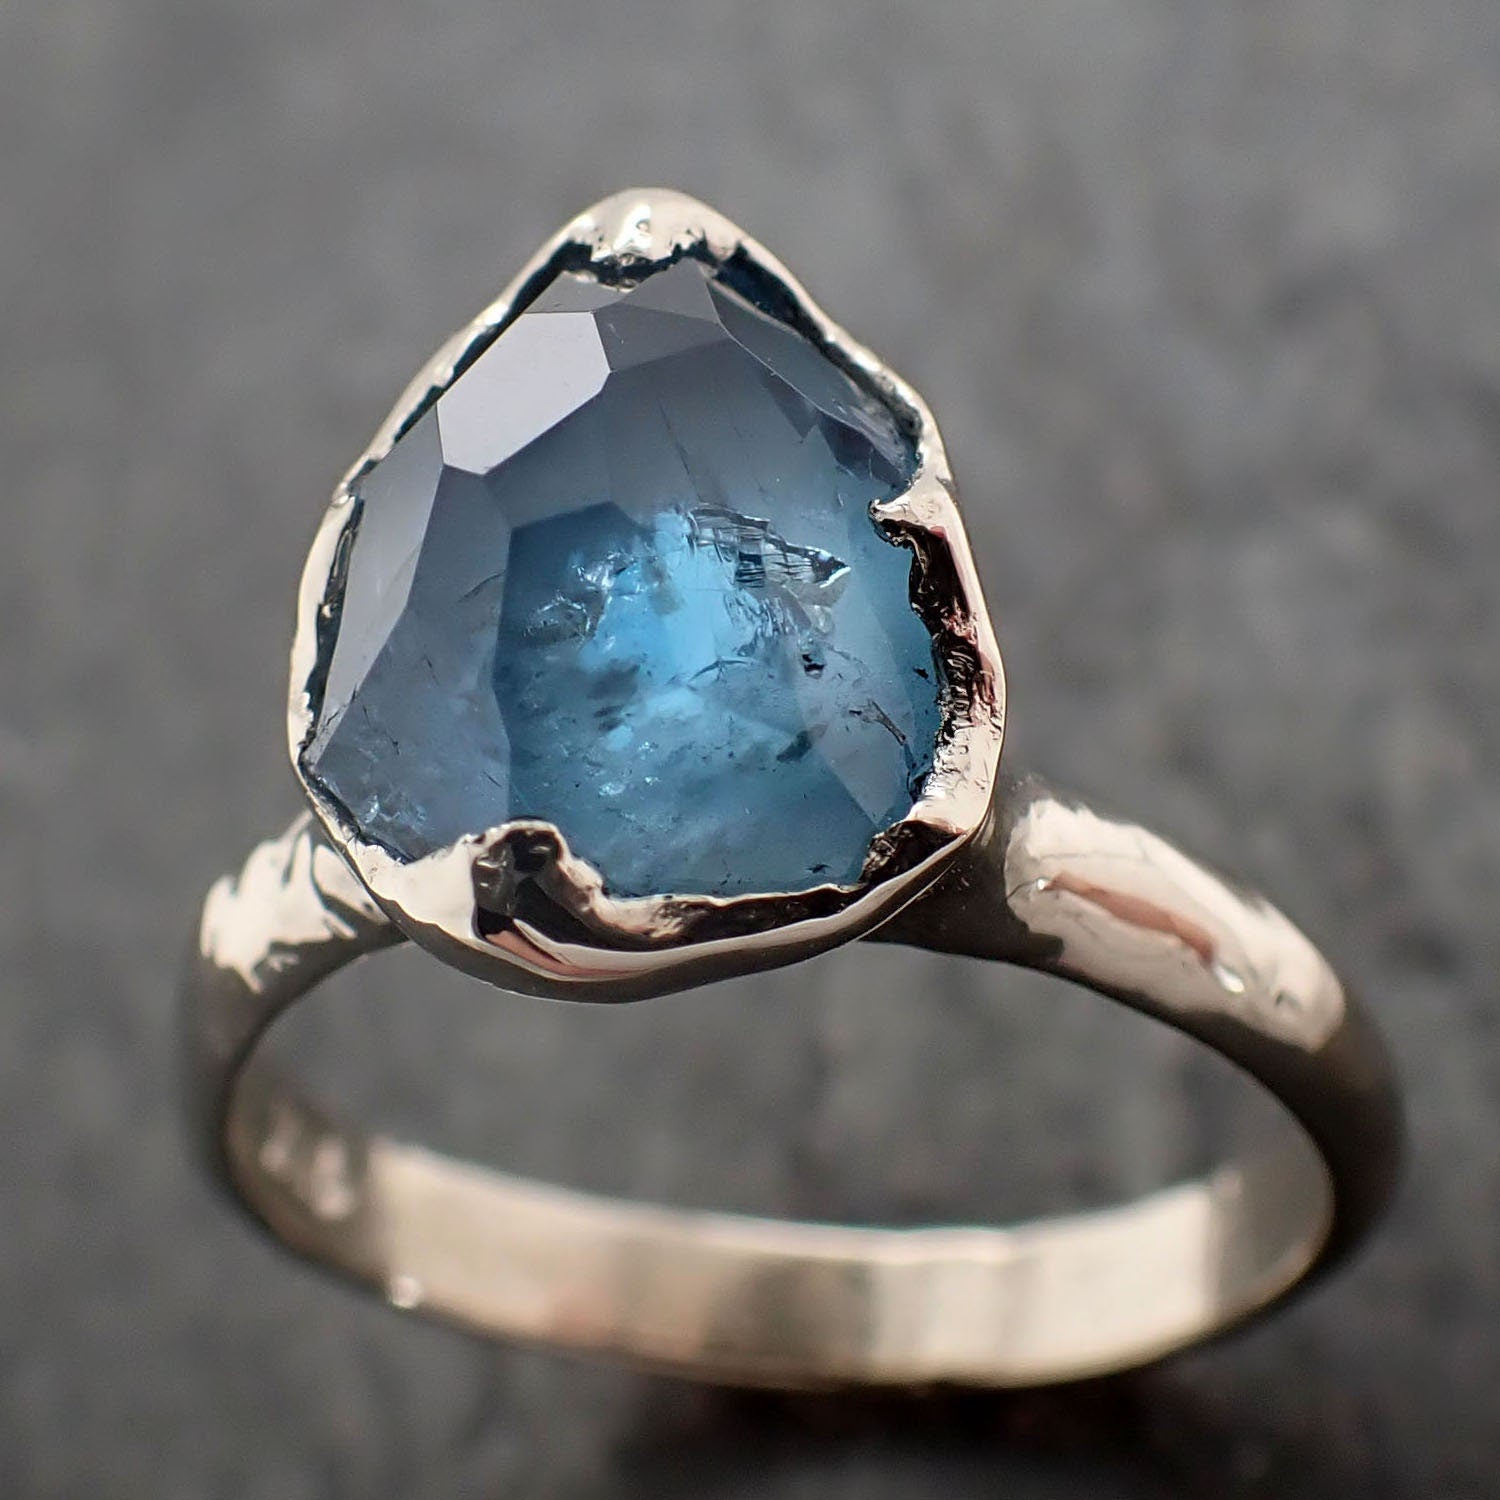 Partially faceted Aquamarine Solitaire Ring 18k gold Custom One Of a Kind Gemstone Ring Bespoke byAngeline 2988